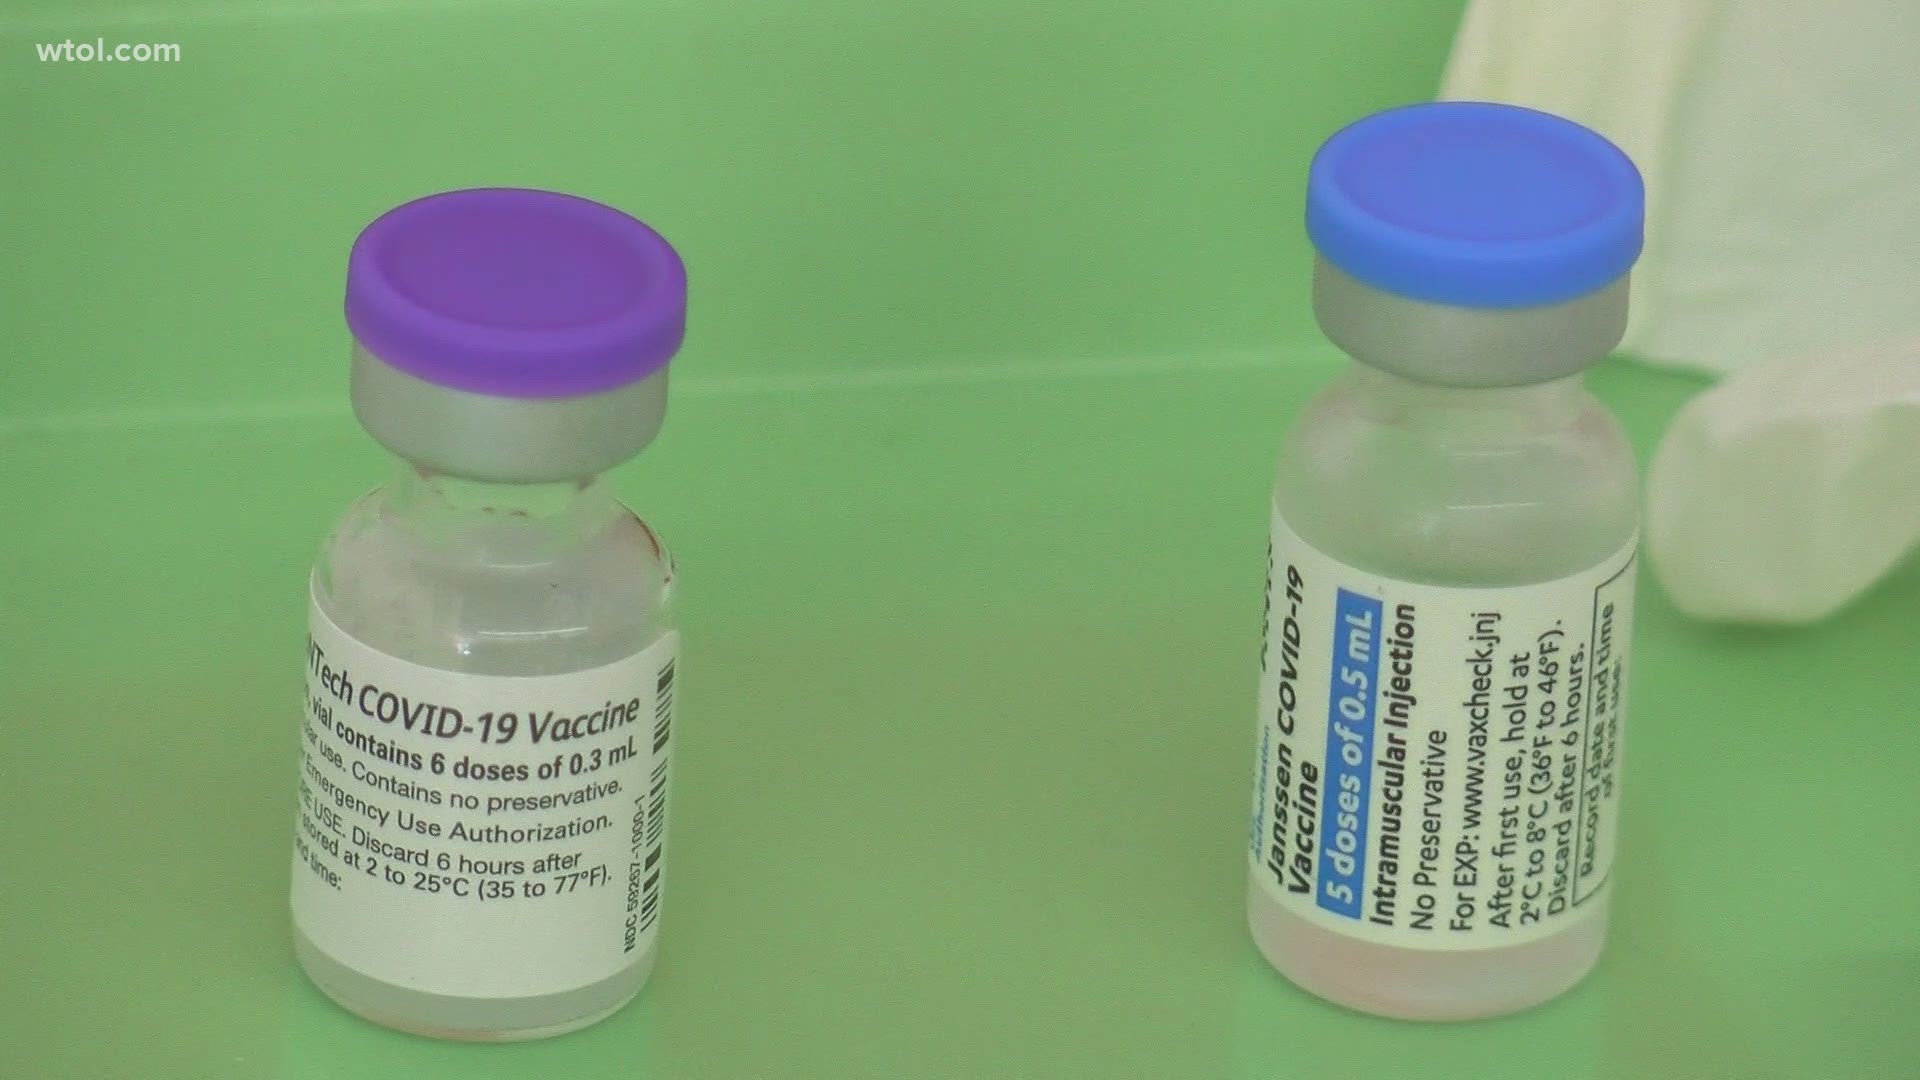 The Toledo-Lucas County Health Department says they want to make sure vaccines are available wherever people are.